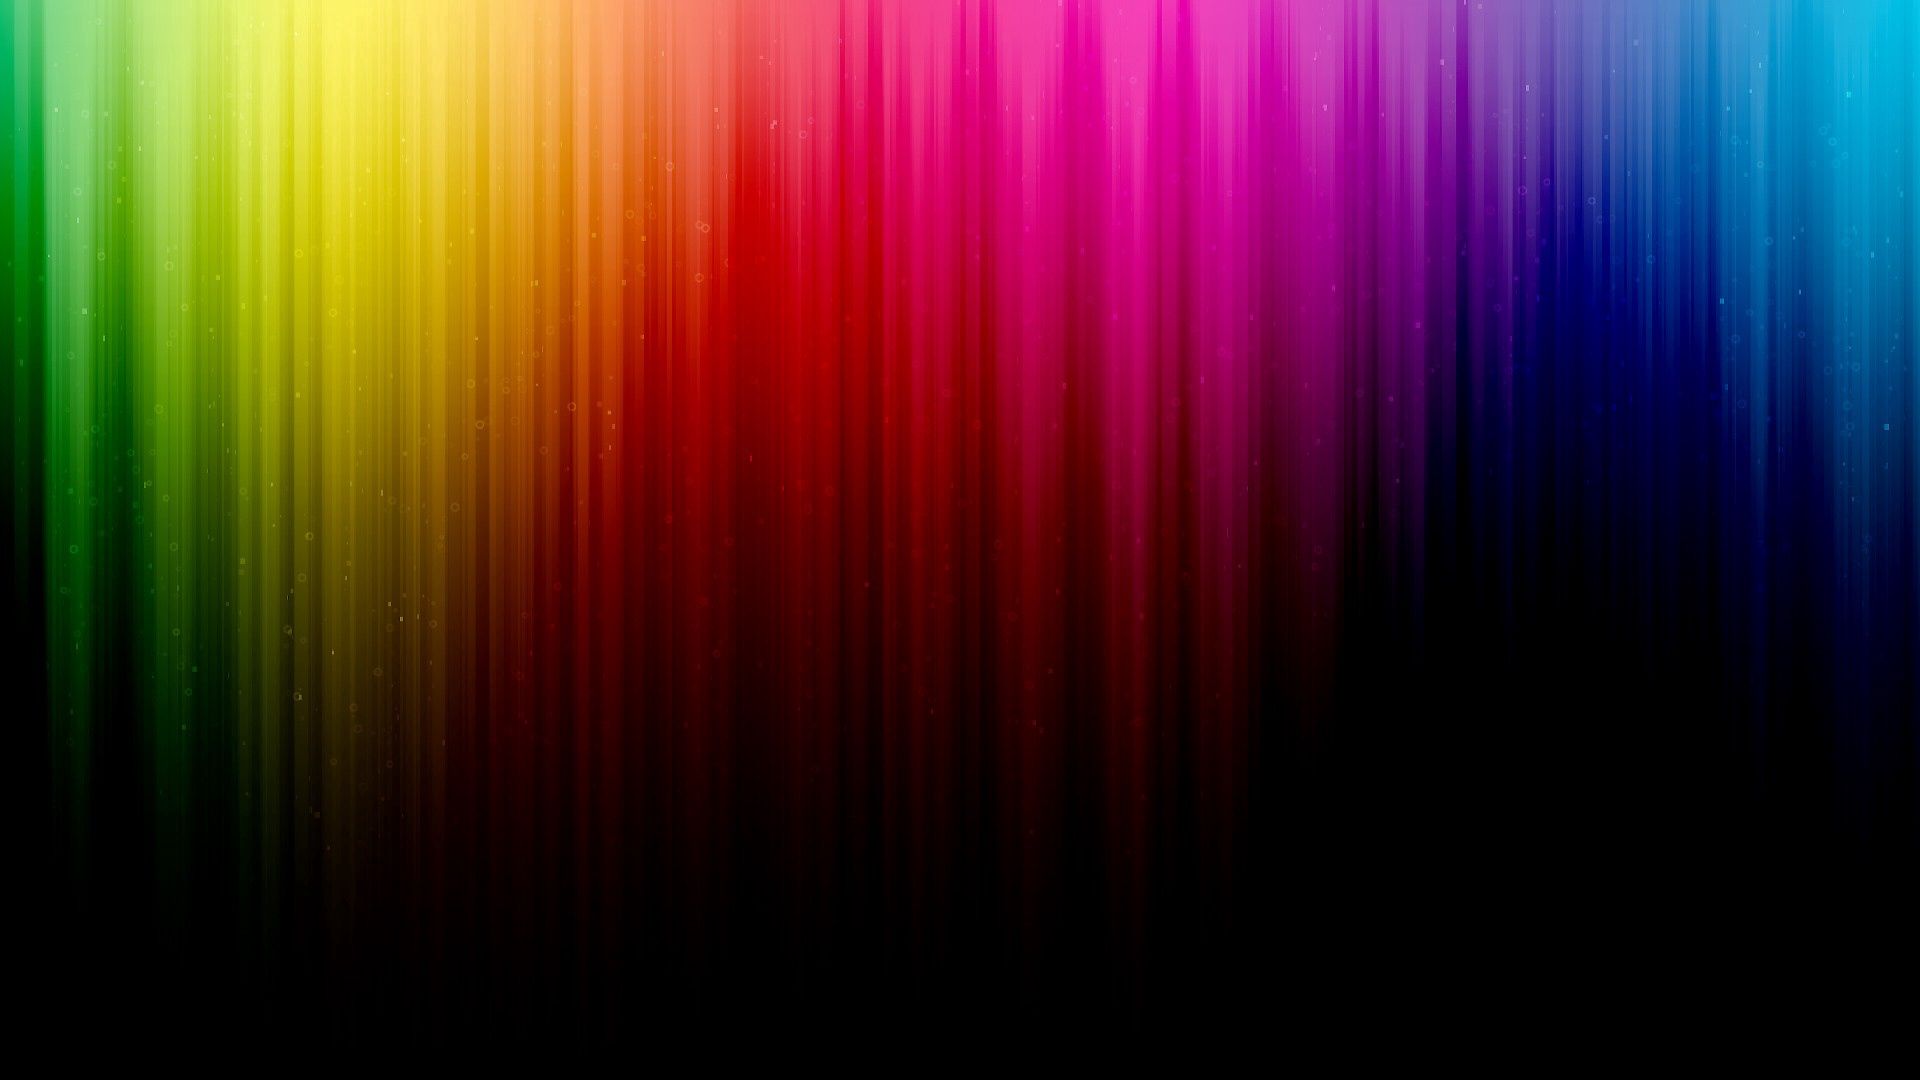 iridescent, streaks, abstract, background, rainbow, lines, shadow, stripes, vertical